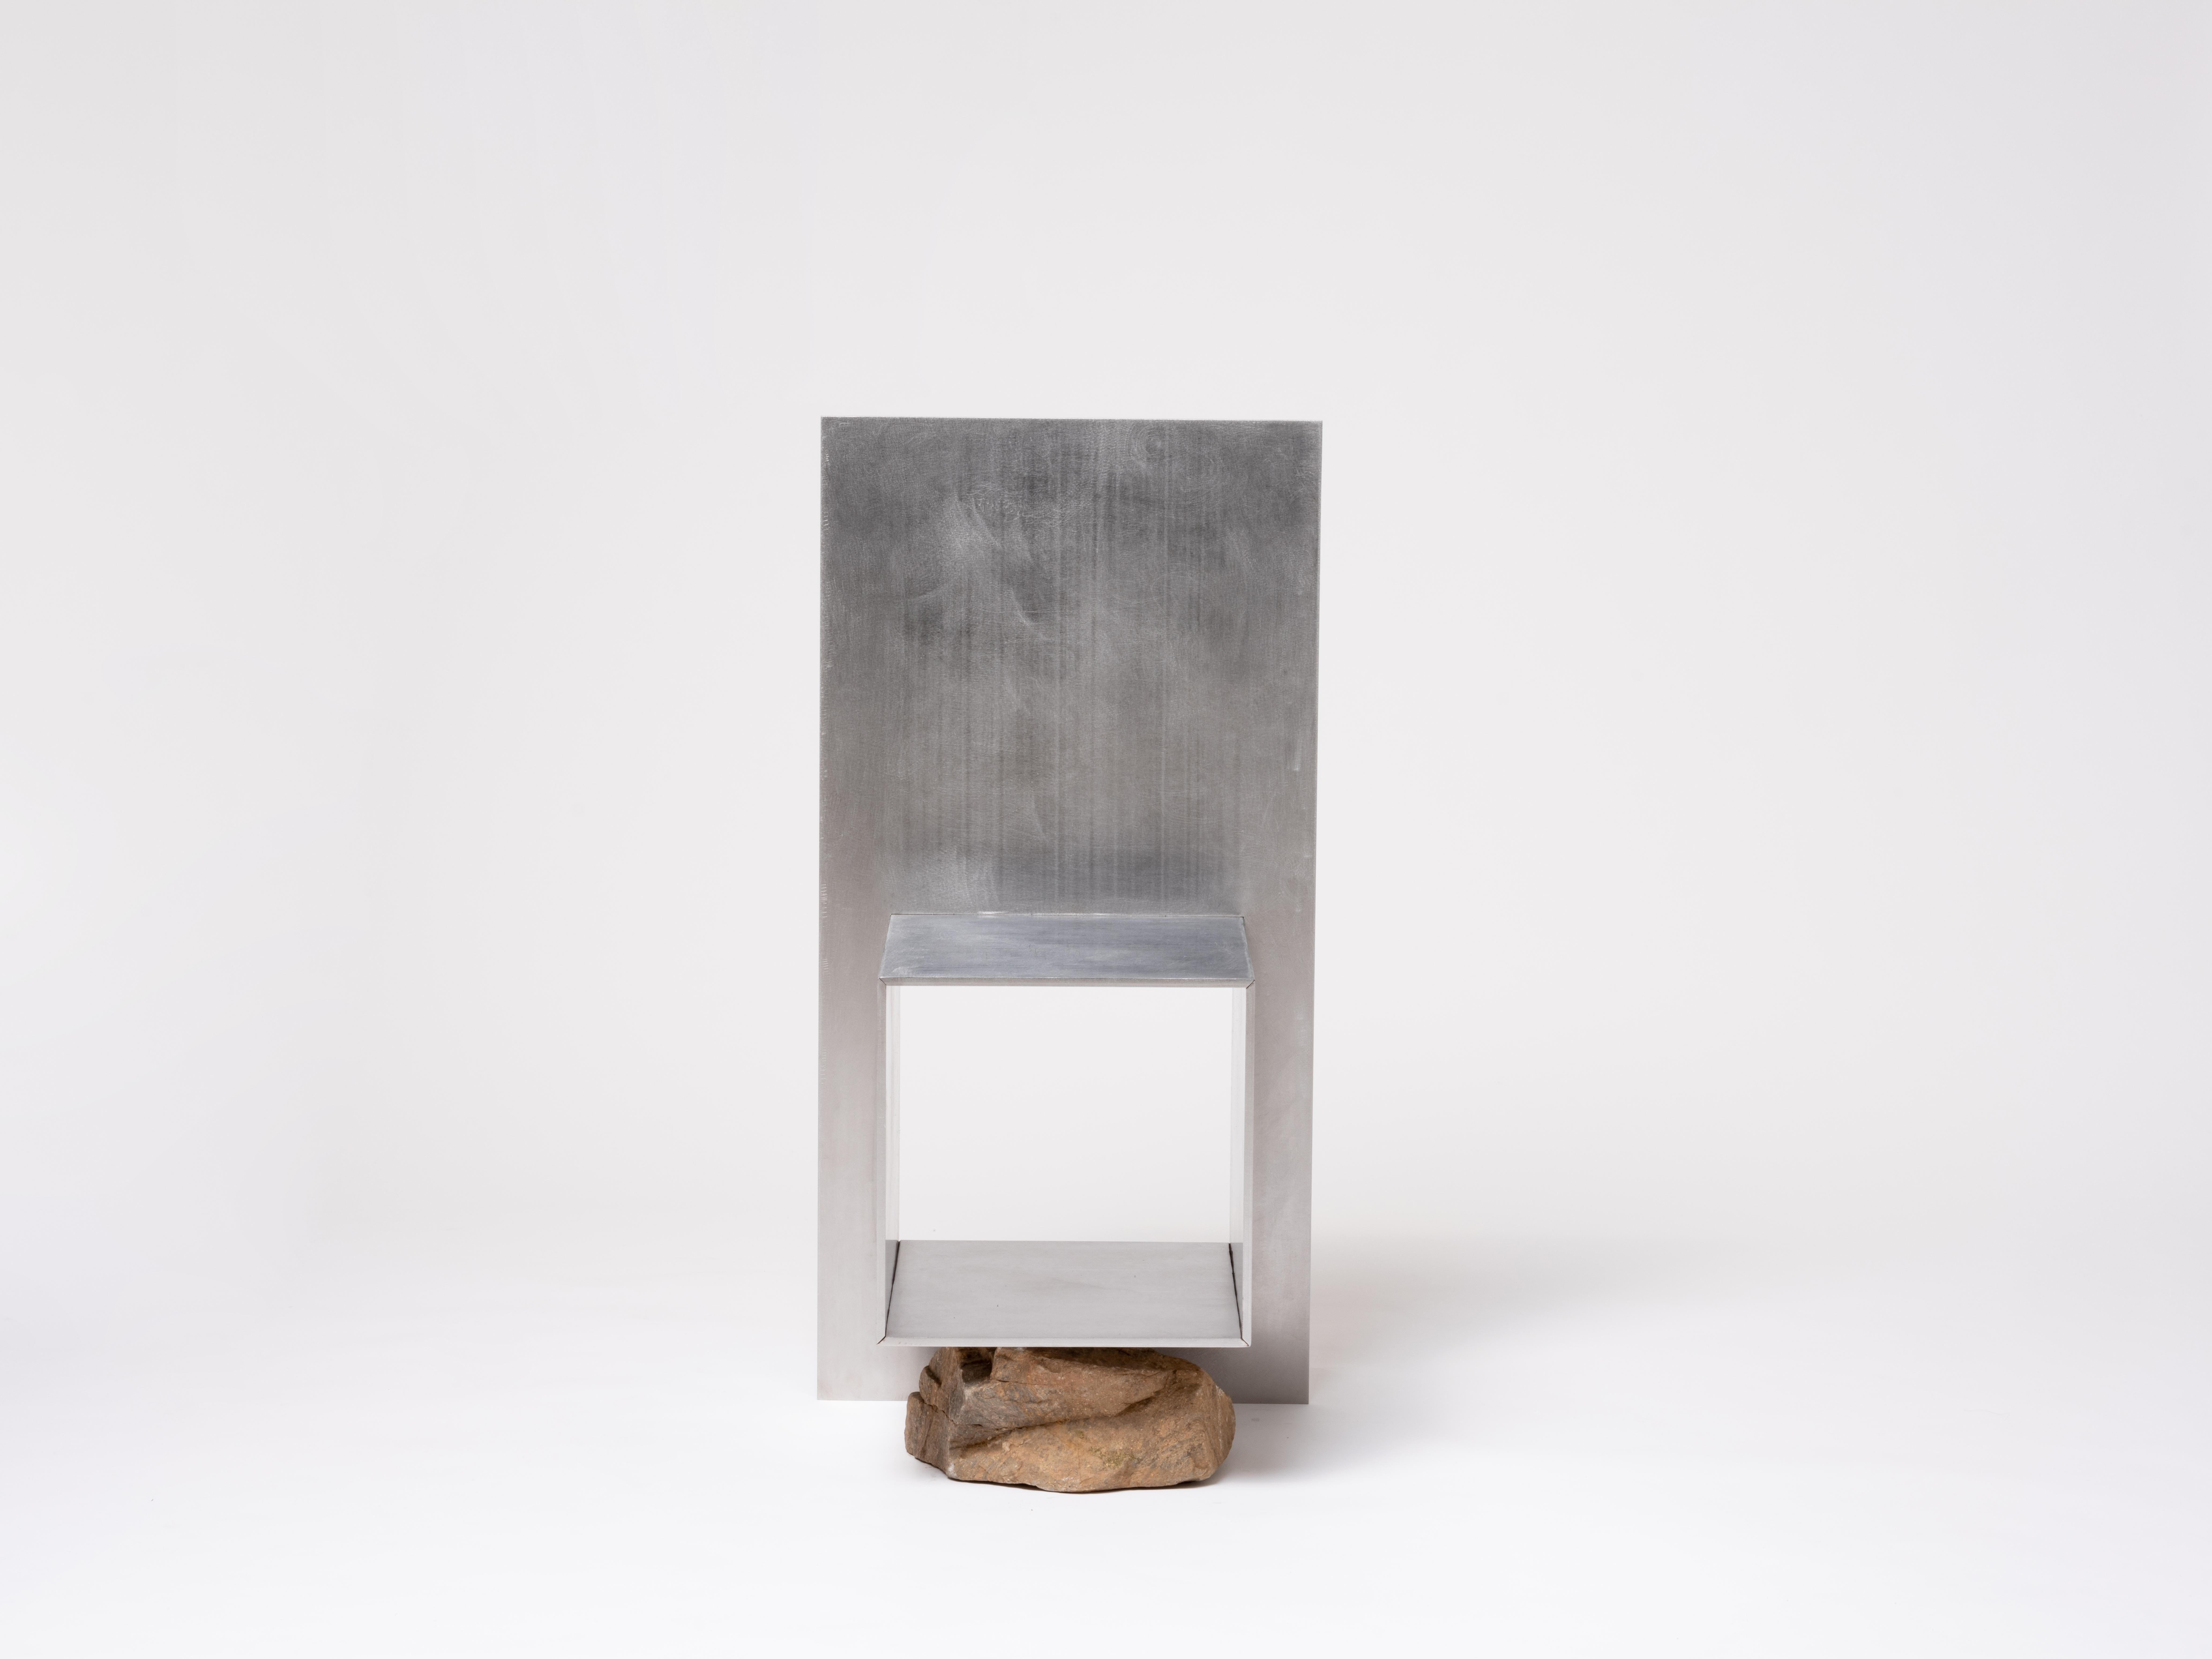 Proportions of stone chair by Lee Sisan, 2019
Dimensions: W 45 x D 41 x H 90 cm
Materials: Stainless steel, natural stone

Each piece is made to order and uses natural stones, so please expect some variability in design.

